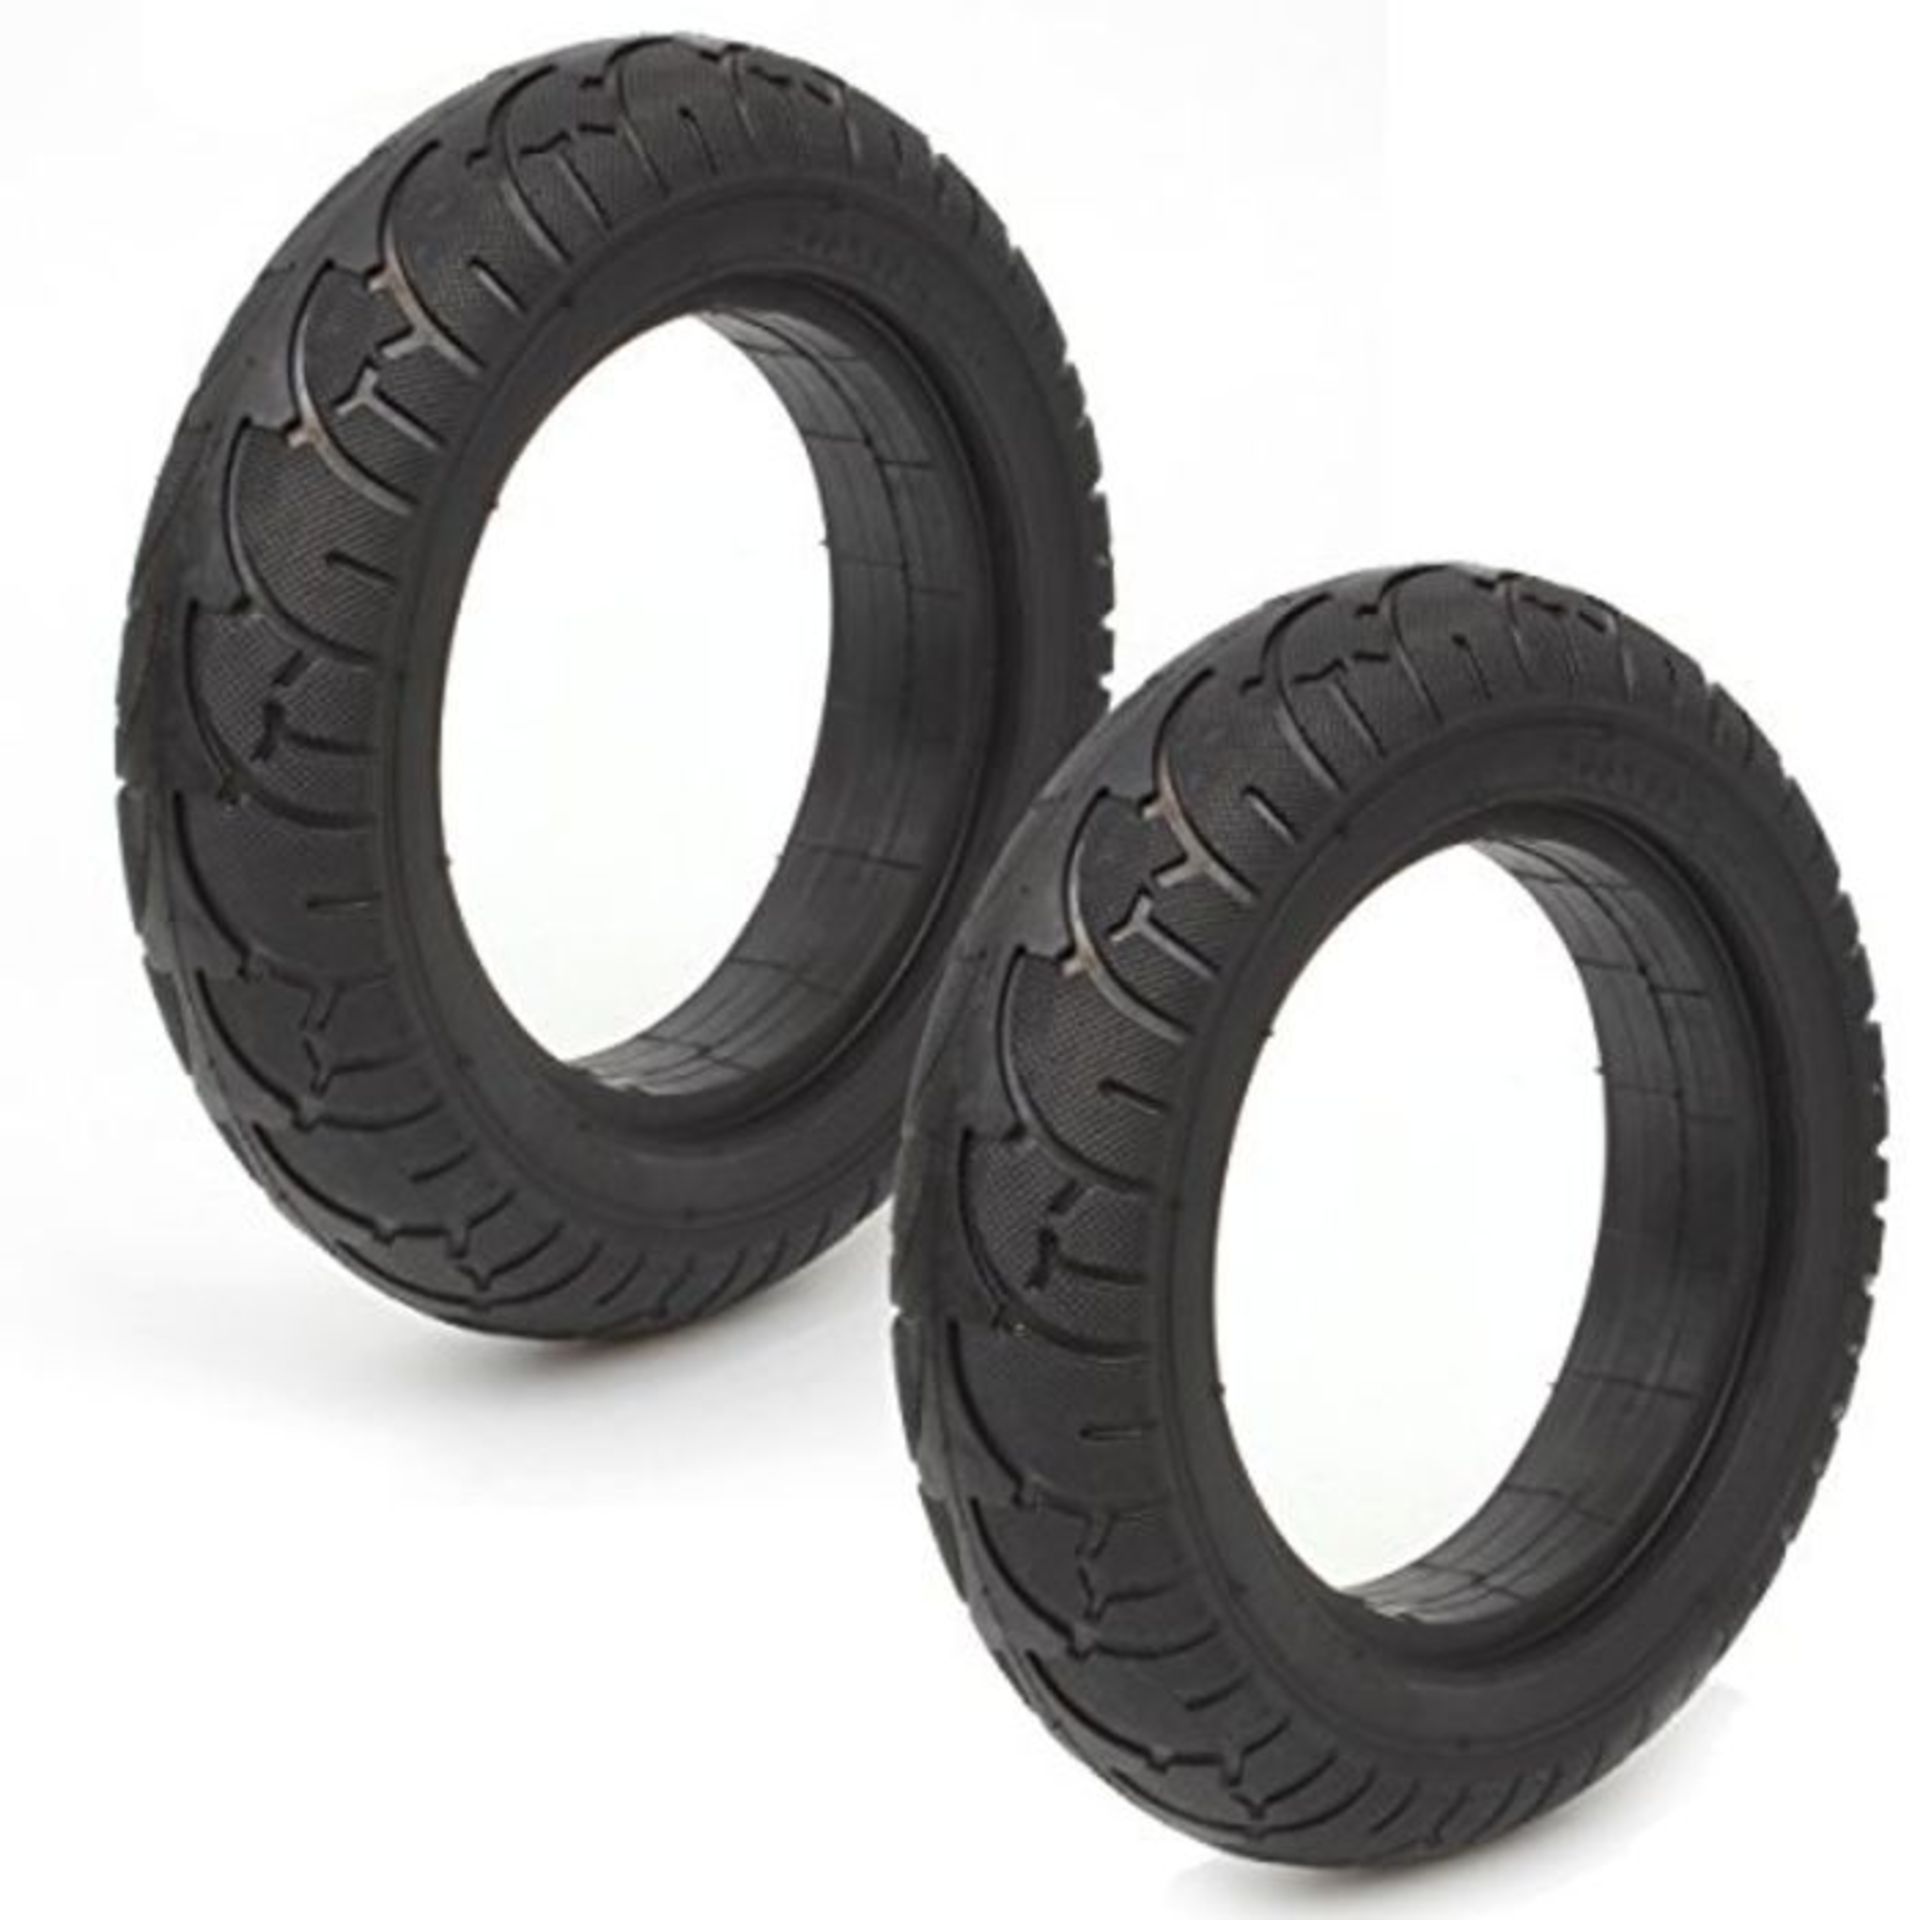 wingsmoto 200x50 (8"x2") Solid Tires Airless Tire Tyre Replacement for Swagman 2-wheel